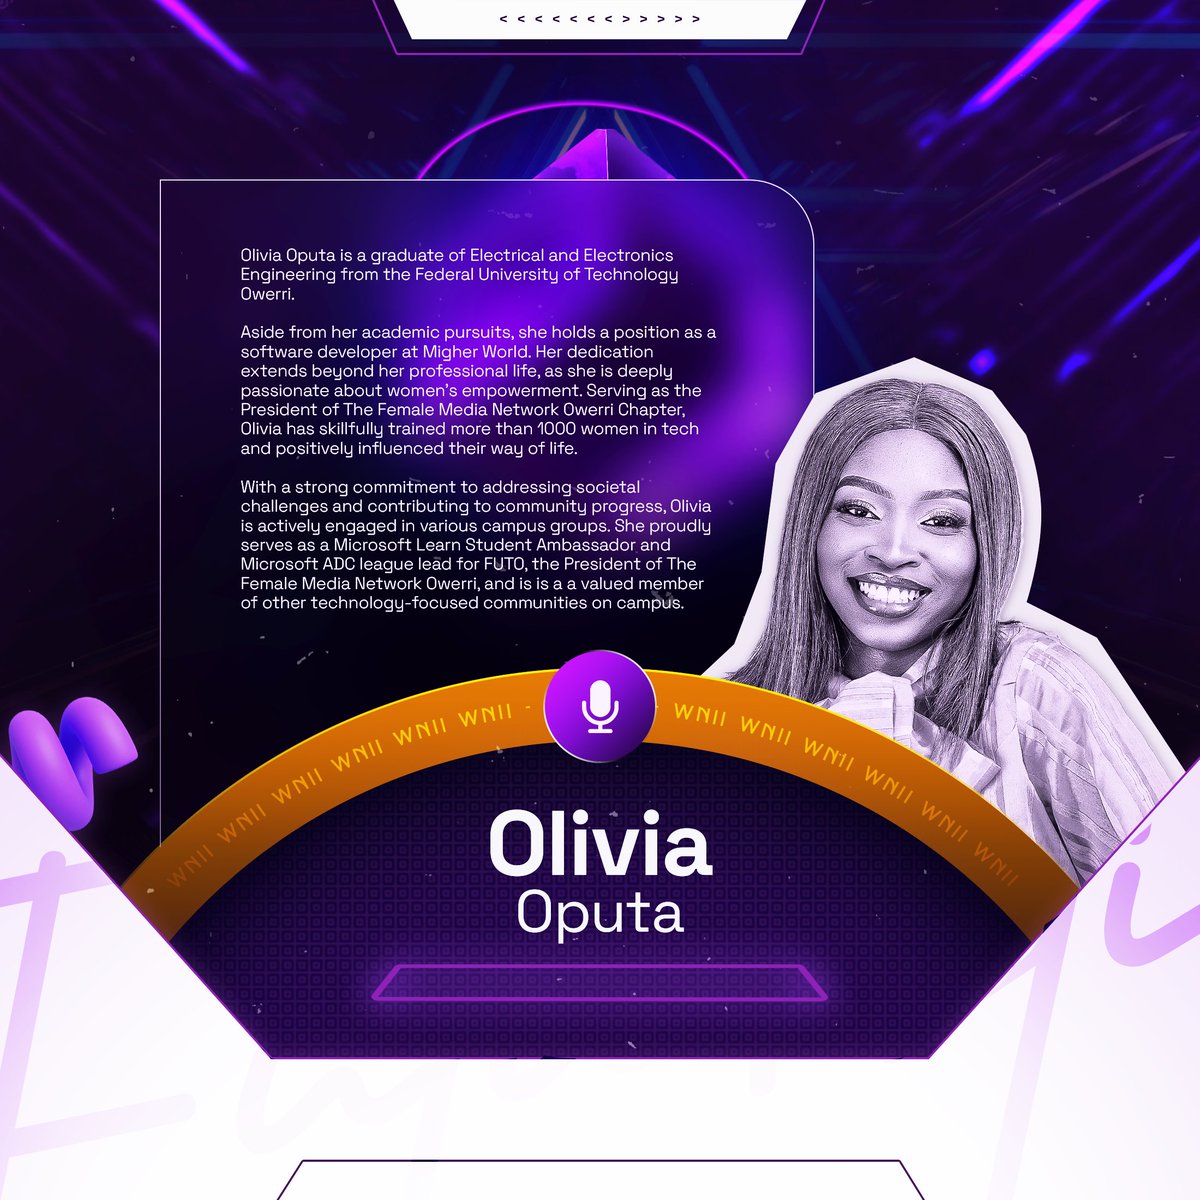 Meet @OliviaOputa_, a graduate of Electrical and Electronics Engineering from the Federal University of Technology Owerri.

Aside from her academic pursuits, she holds a position as a software developer at Migher World. 

#whatsnext2 #futureintech #techevent #newbies